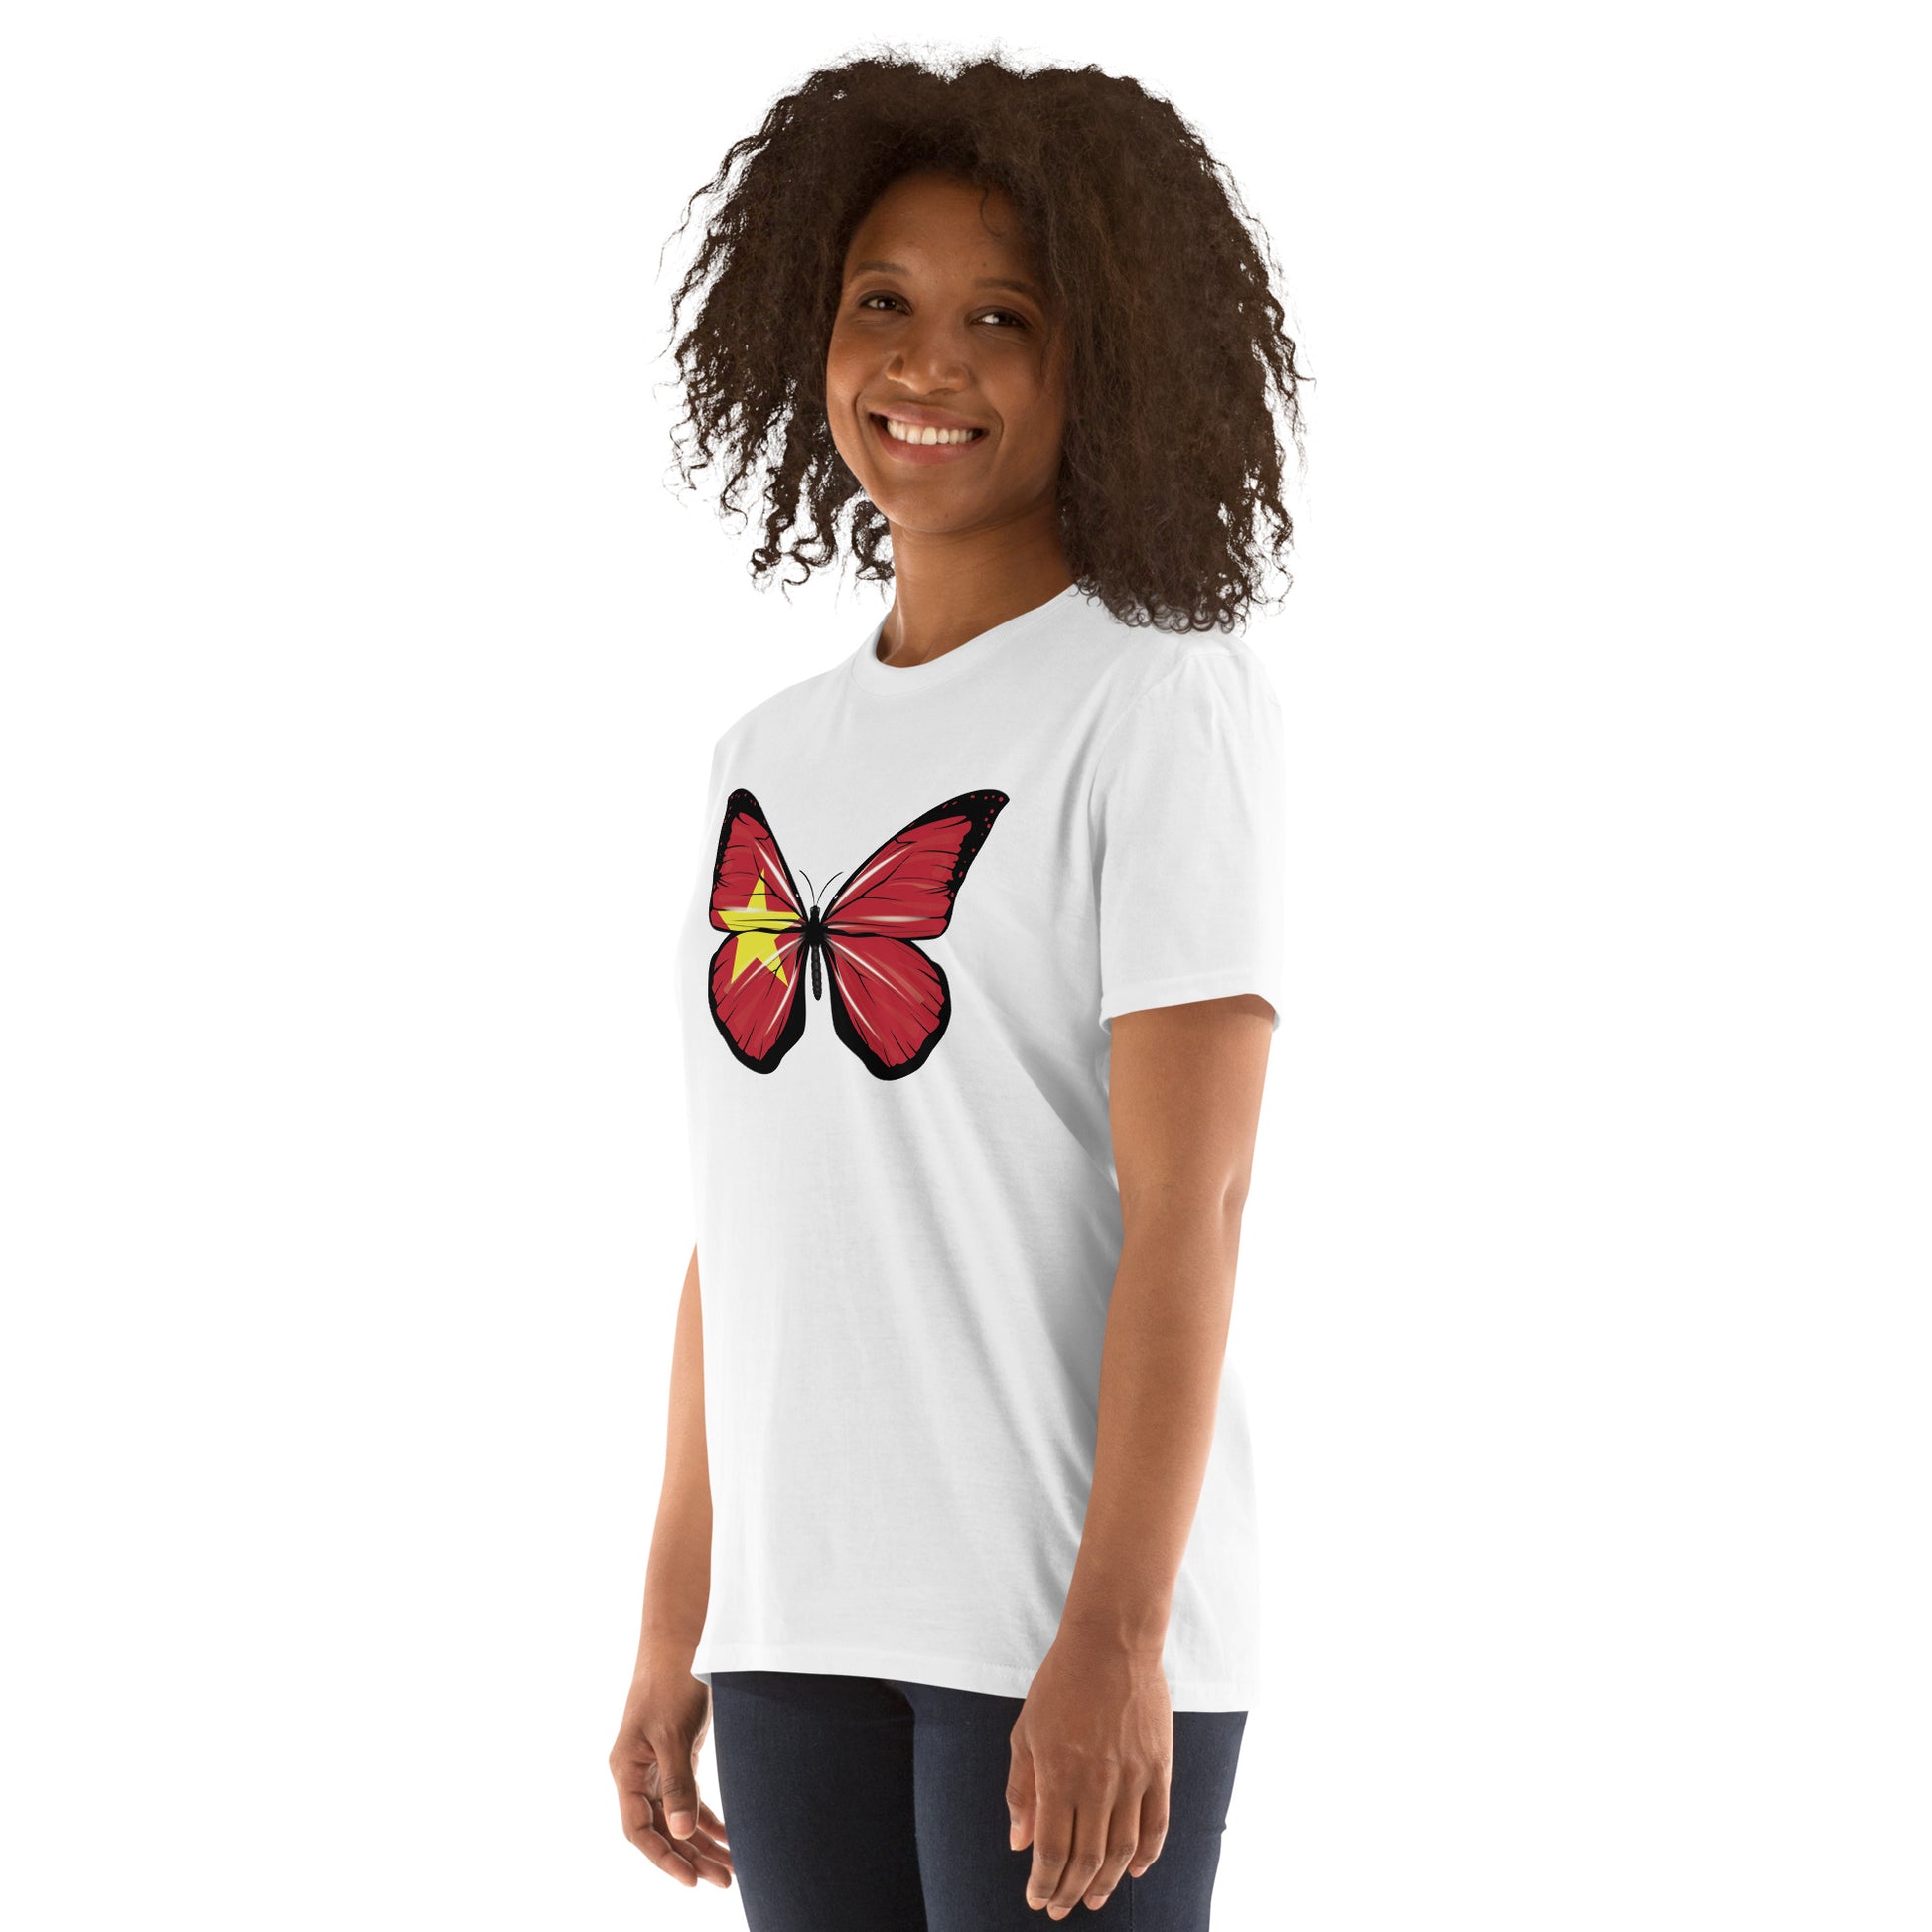 Authentic Vietnamese t-shirt with butterfly